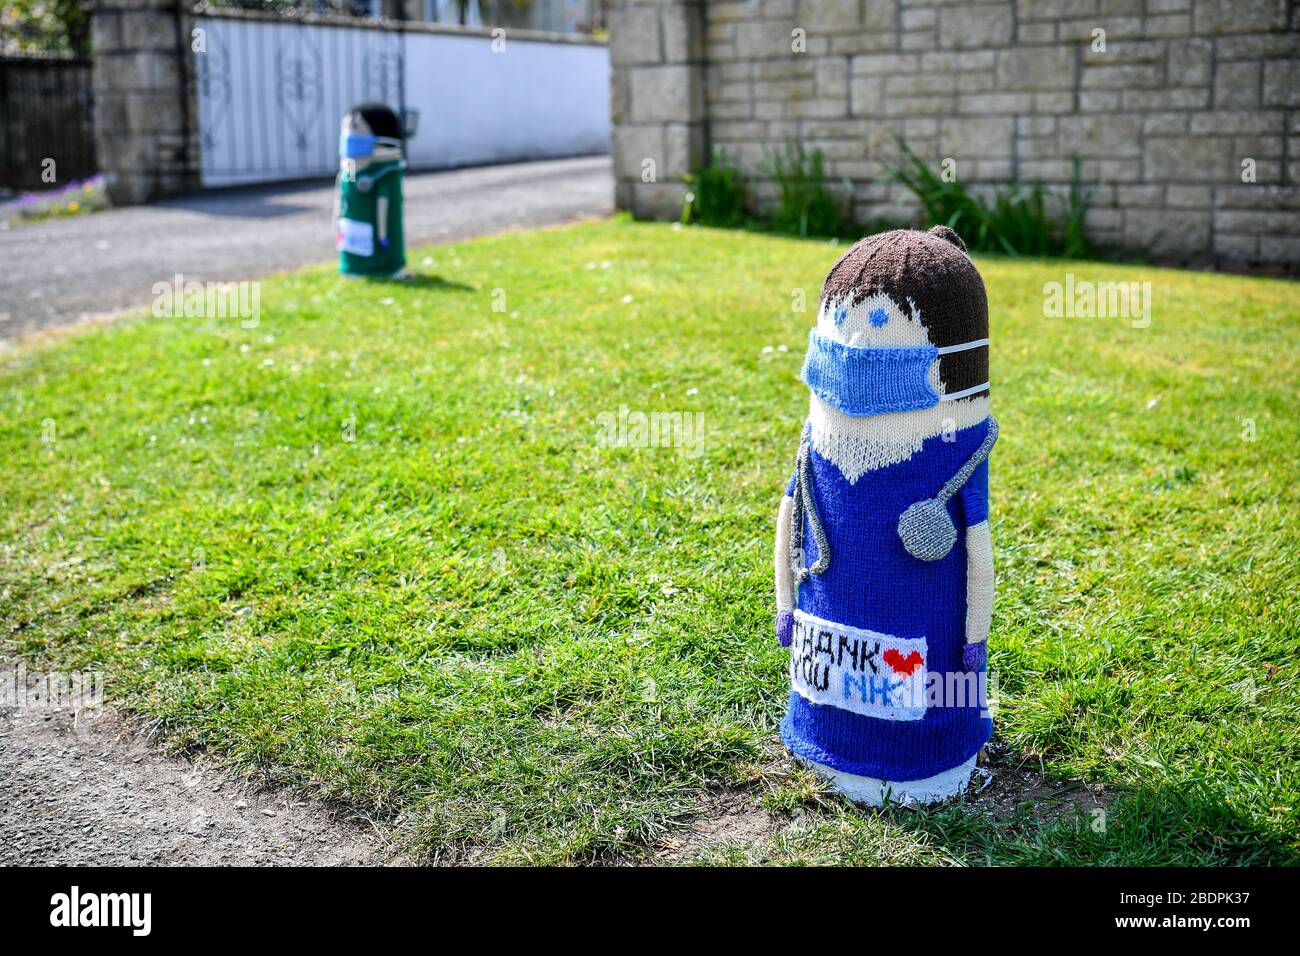 Two knitted NHS doctors are fitted over bollards outside a house in Oldland Common, South Gloucestershire, as the UK continues in lockdown to help curb the spread of the coronavirus. Stock Photo